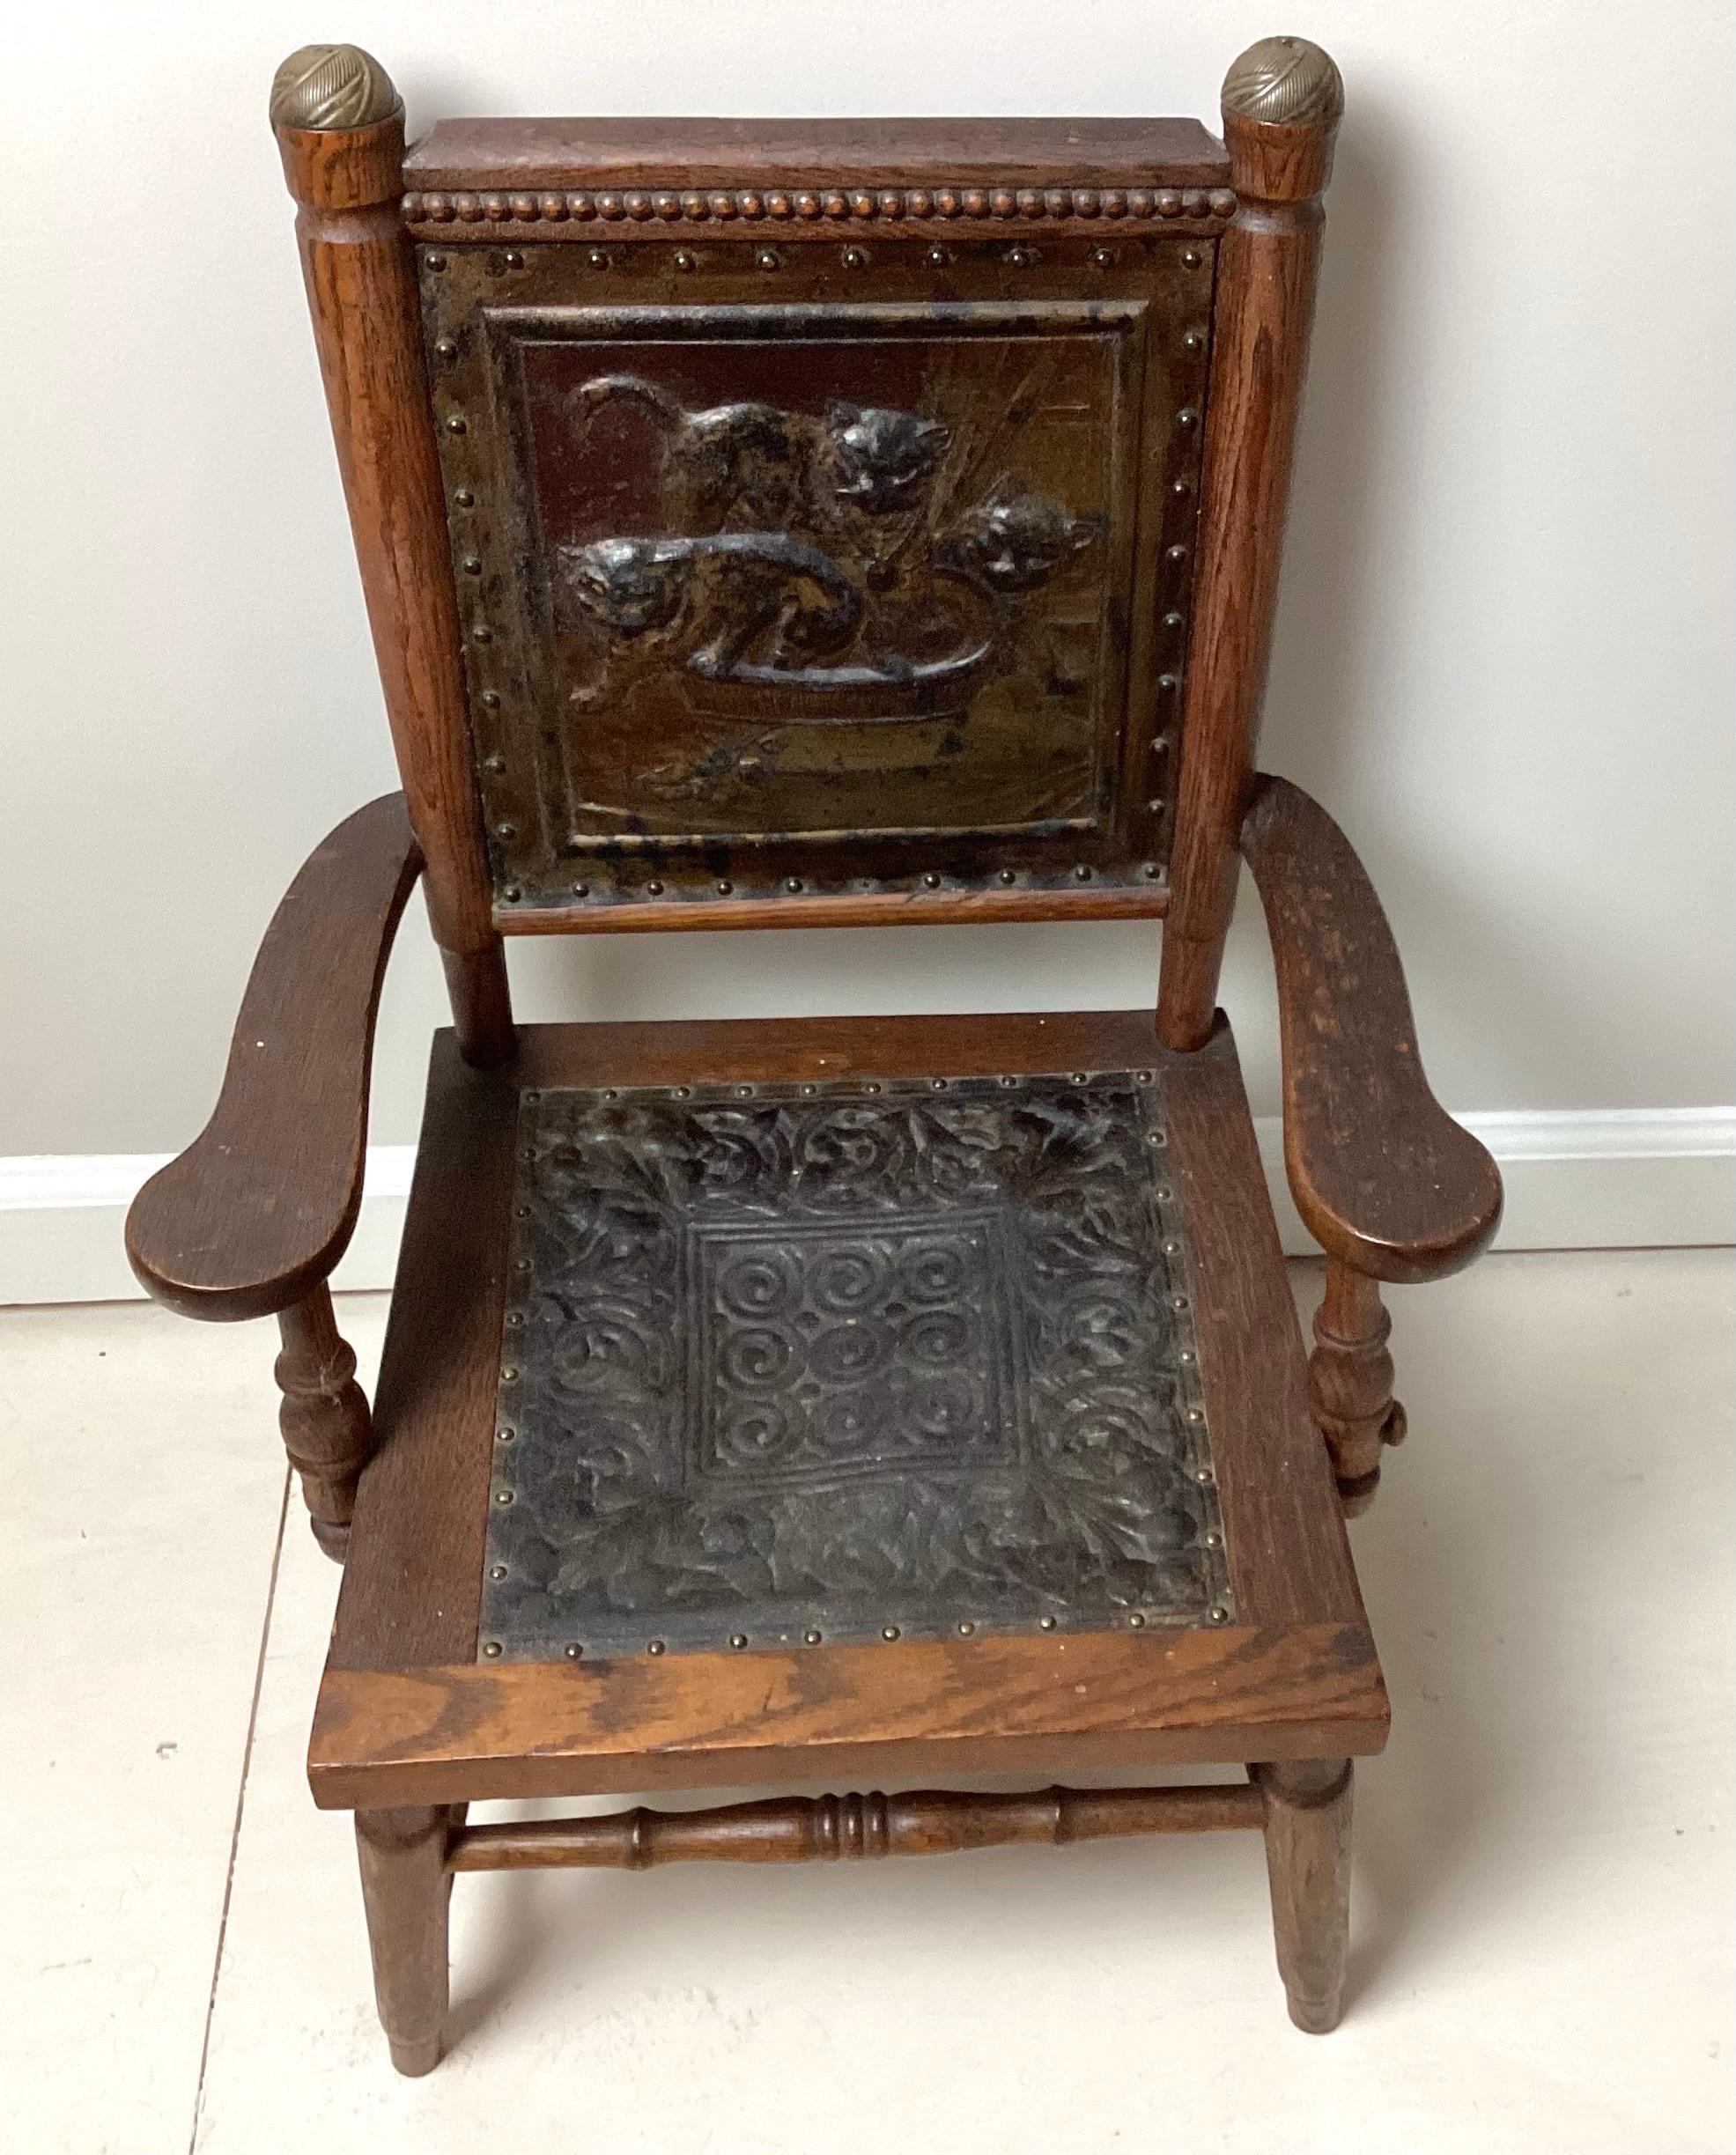 Victorian Aesthetic Movement Childs Chair with Pressed Leather Cats on Seat Back. 17” wide by 14” deep by 24  1/2” tall seat hight 10”. Pressed leather seat has old repair. This chair is in old original condition.